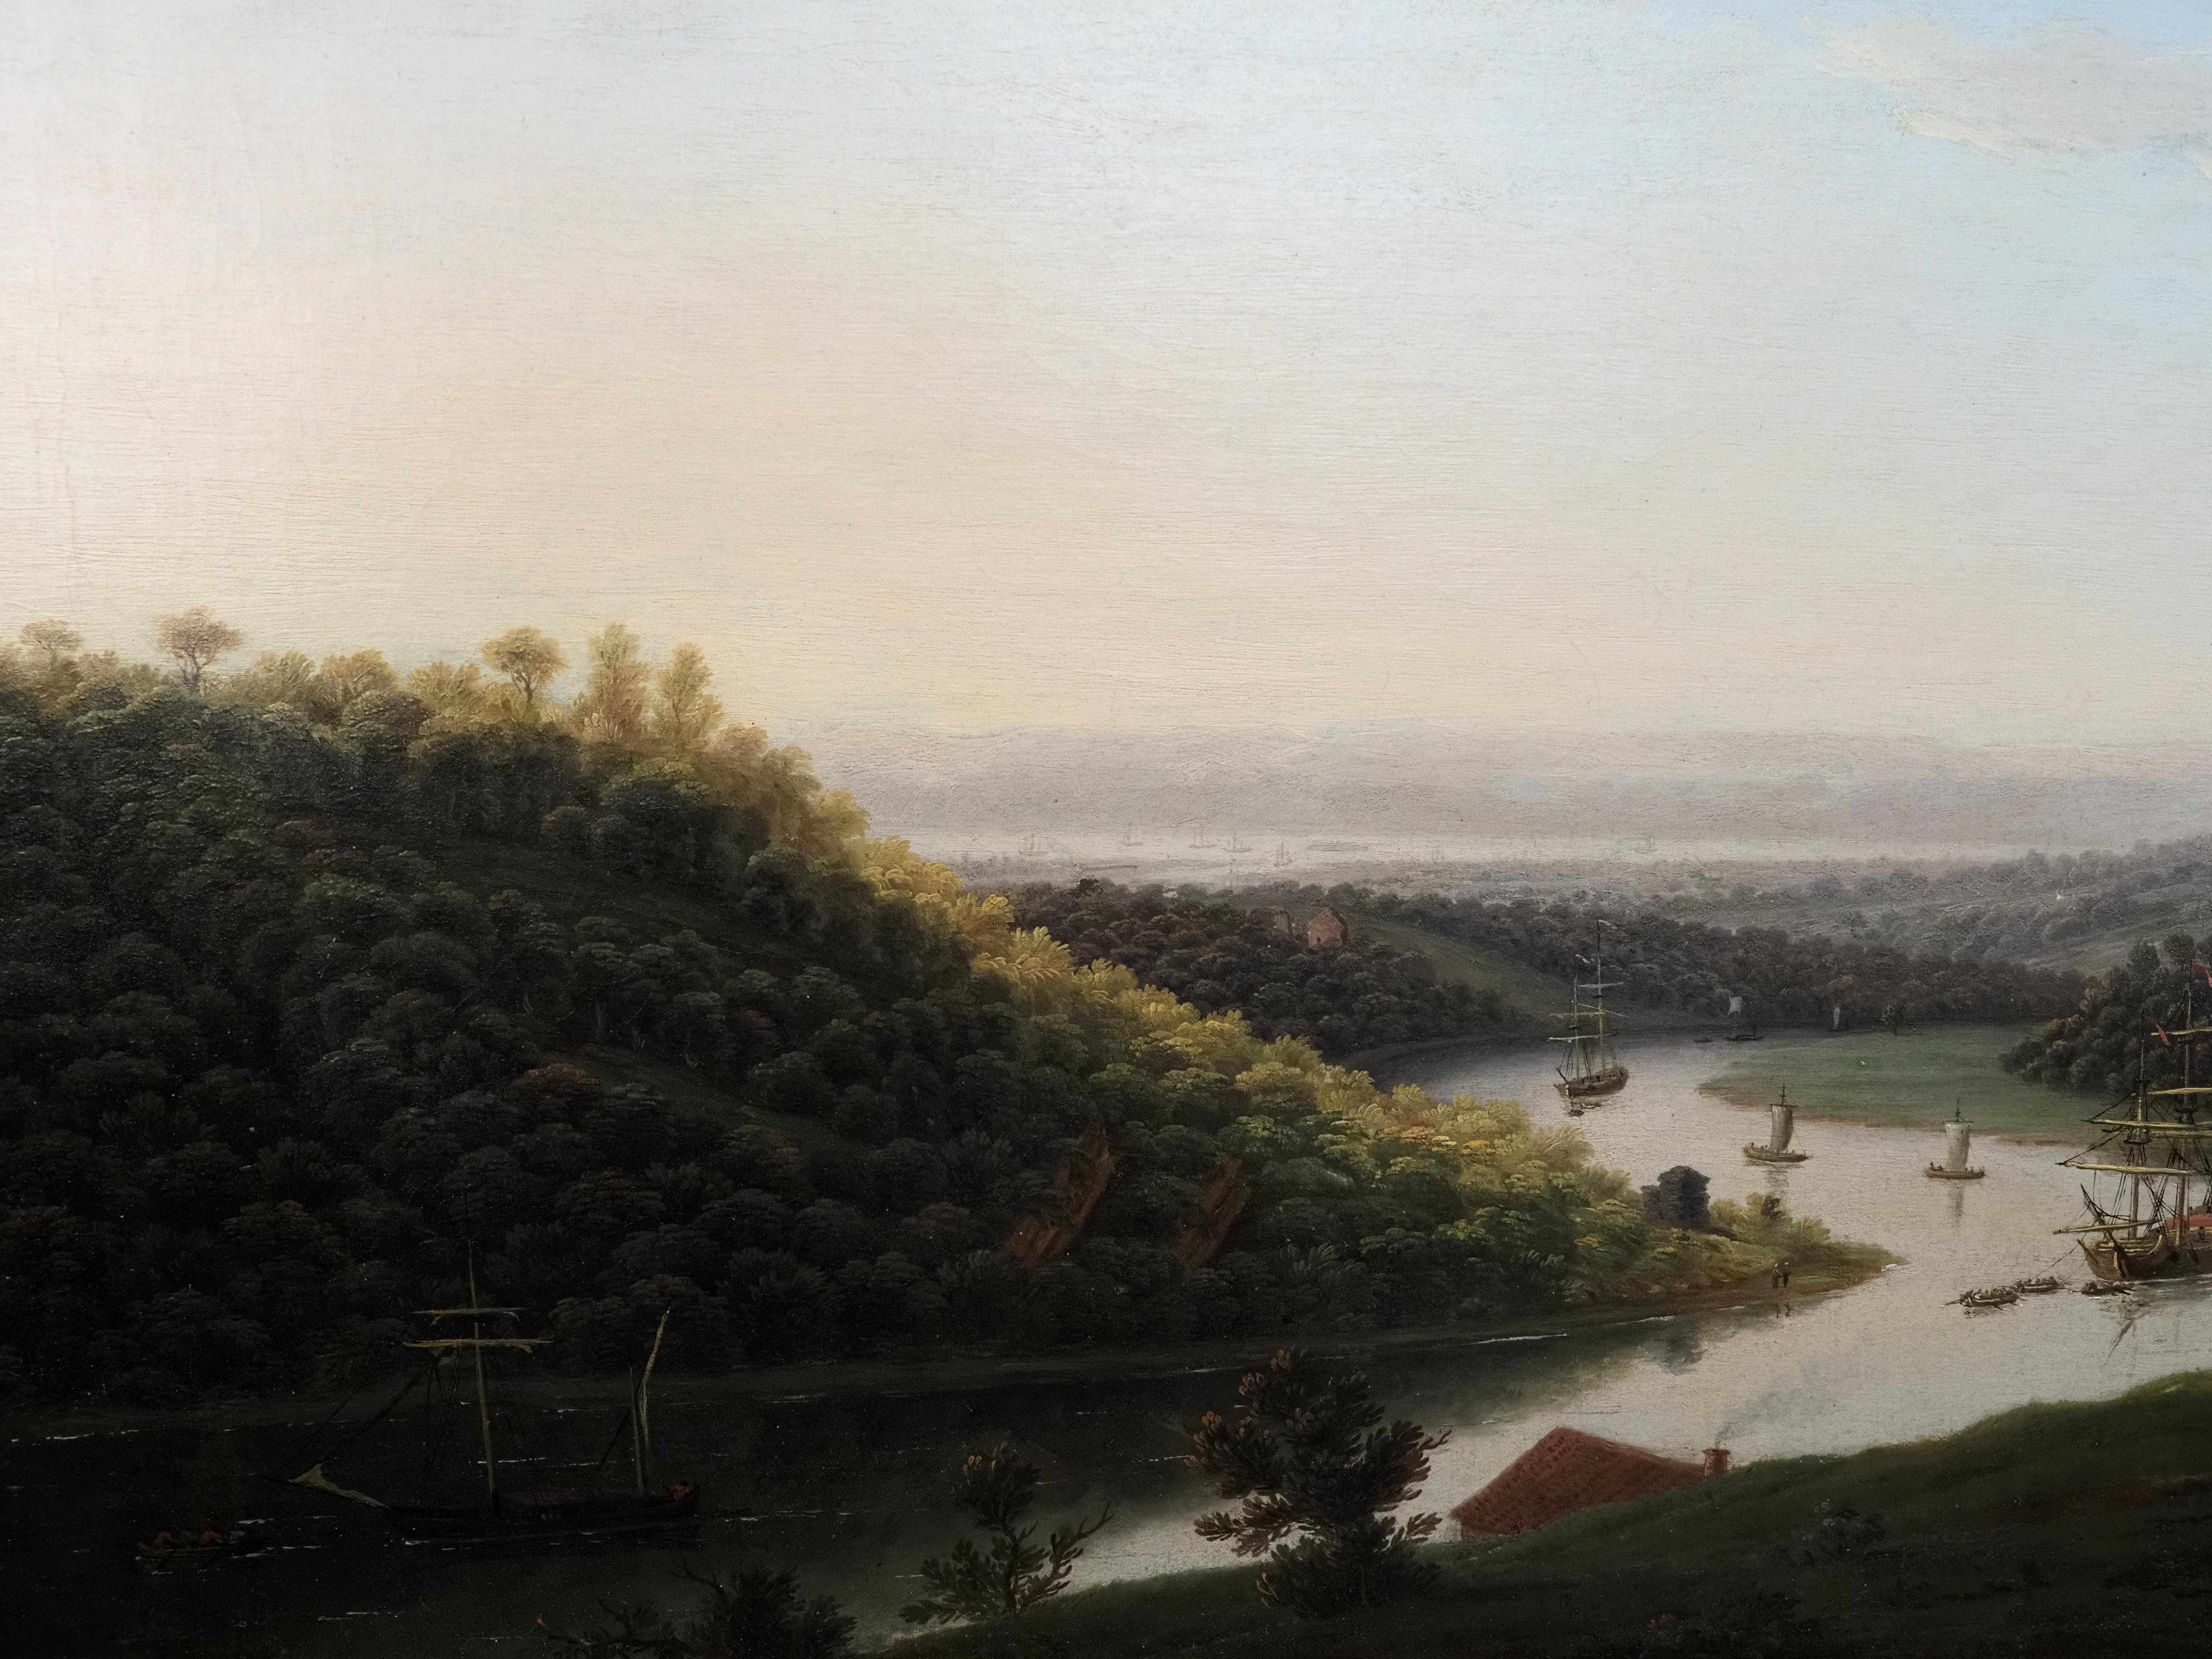 Thomas Smith of Derby (c. 1710-1767)
View of Shipping on the River Avon from Durdham Down, near Bristol, 1756
Oil on canvas
Canvas size - 20 x 47 in
Framed size - 26 x 53 in

Provenance
with Frost & Reed;
The Collection of Walter Frost;
thence by